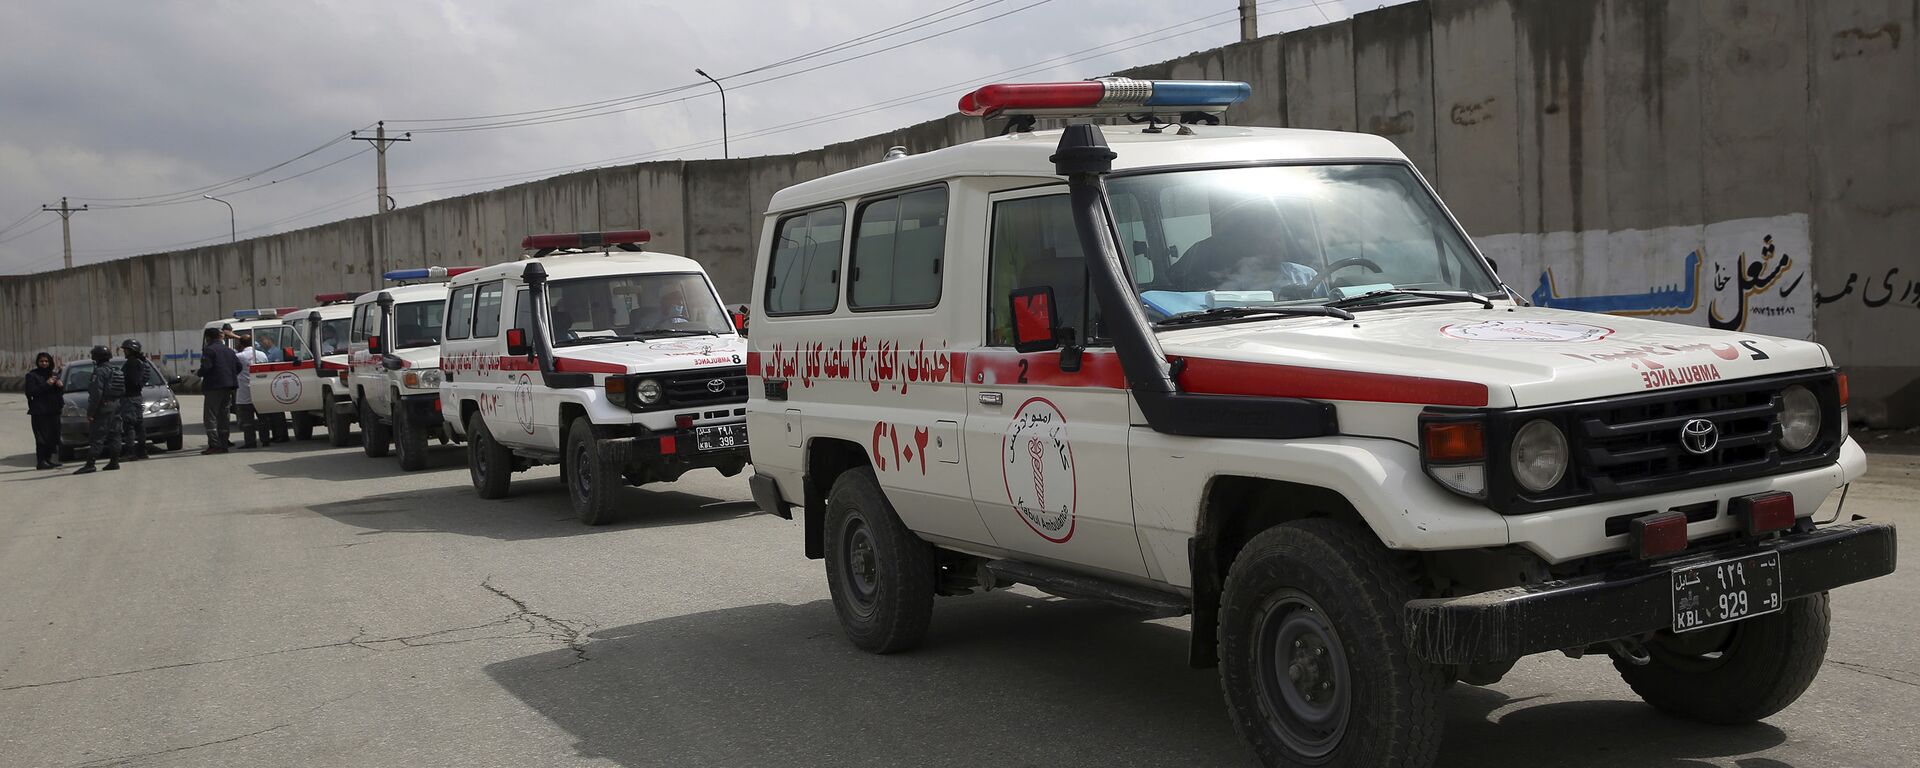 Ambulances wait near the site of an attack in Kabul, Afghanistan, Wednesday, March 25, 2020 - Sputnik International, 1920, 18.12.2022